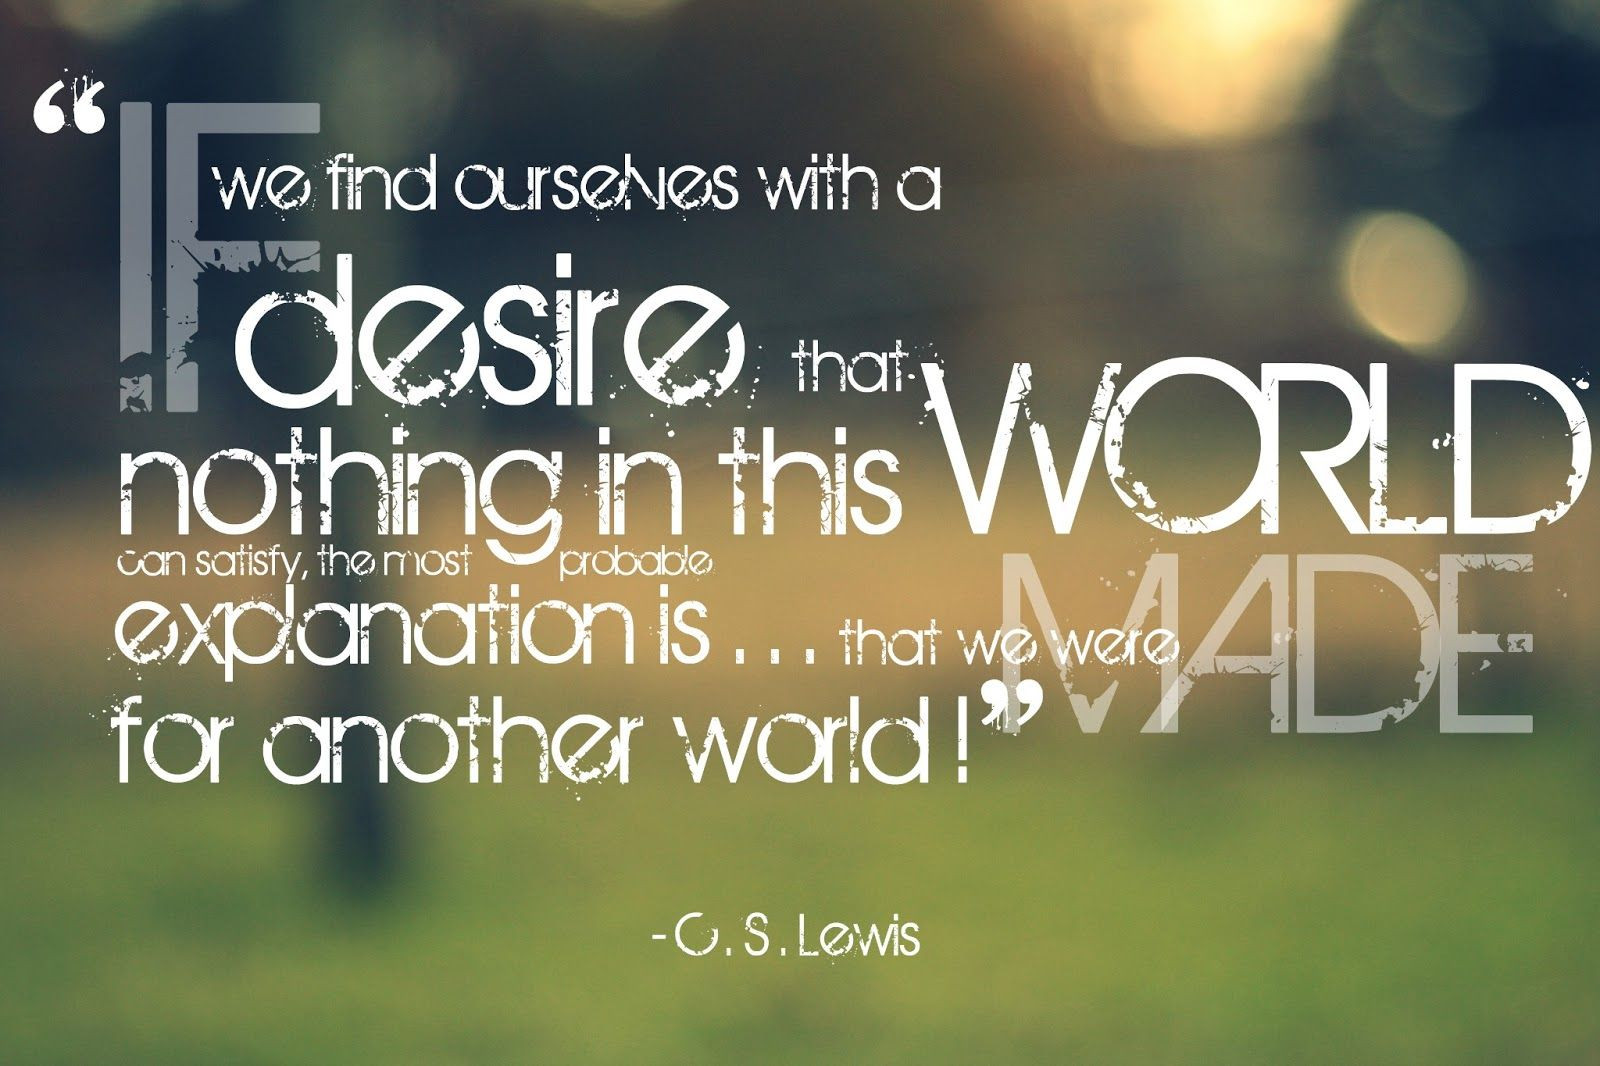 C.S.Lewis Christmas Quotes
 From C S Lewis Quotes QuotesGram